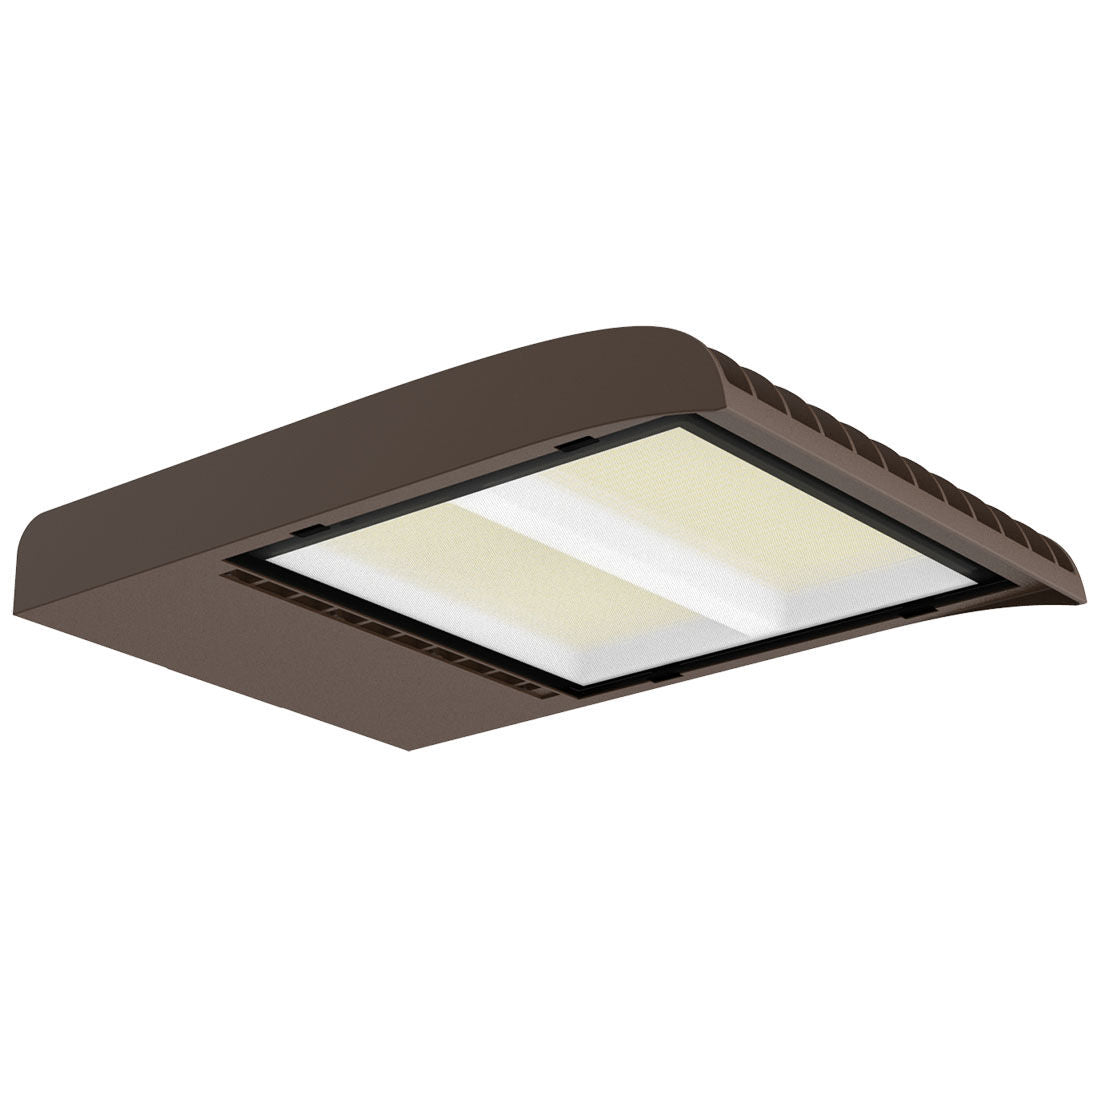 Westgate LFXE-XL-200-300W-50K-P Builder Series Flood/Area Light with Photocell Type 3 Lens (Photocell Disconnect Switch) - Dark Bronze